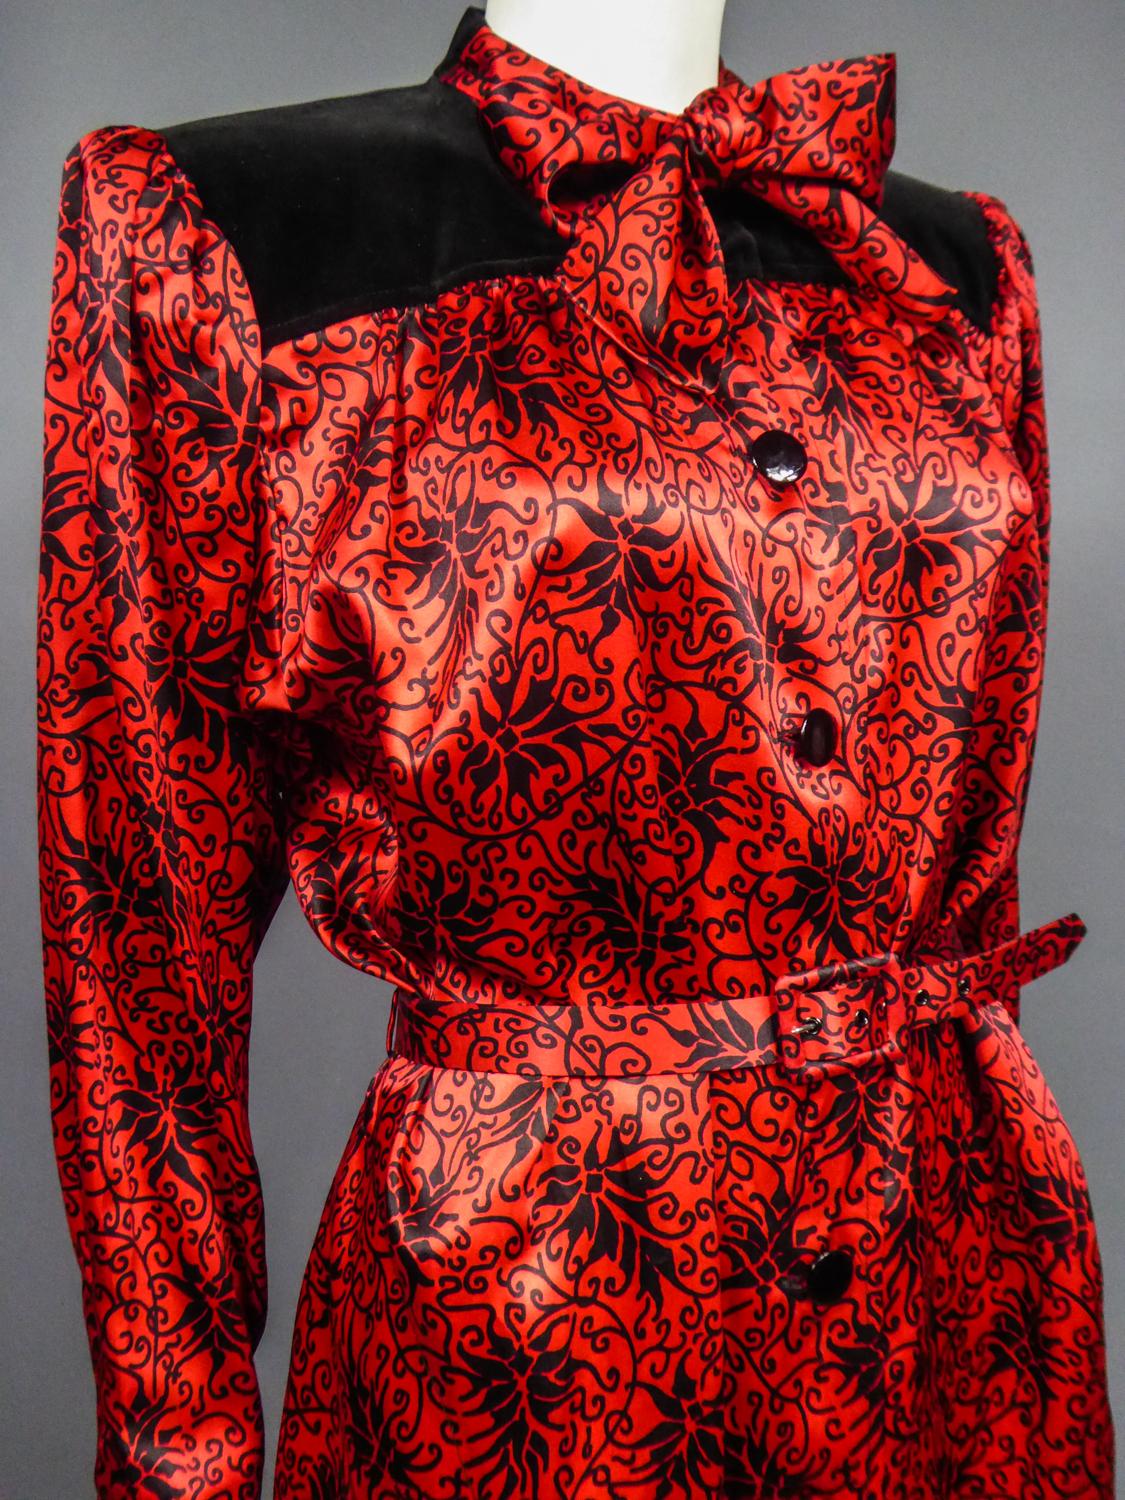 Yves Saint Laurent Variation Blouse Dress in Printed Satin Circa 1990 For Sale 2